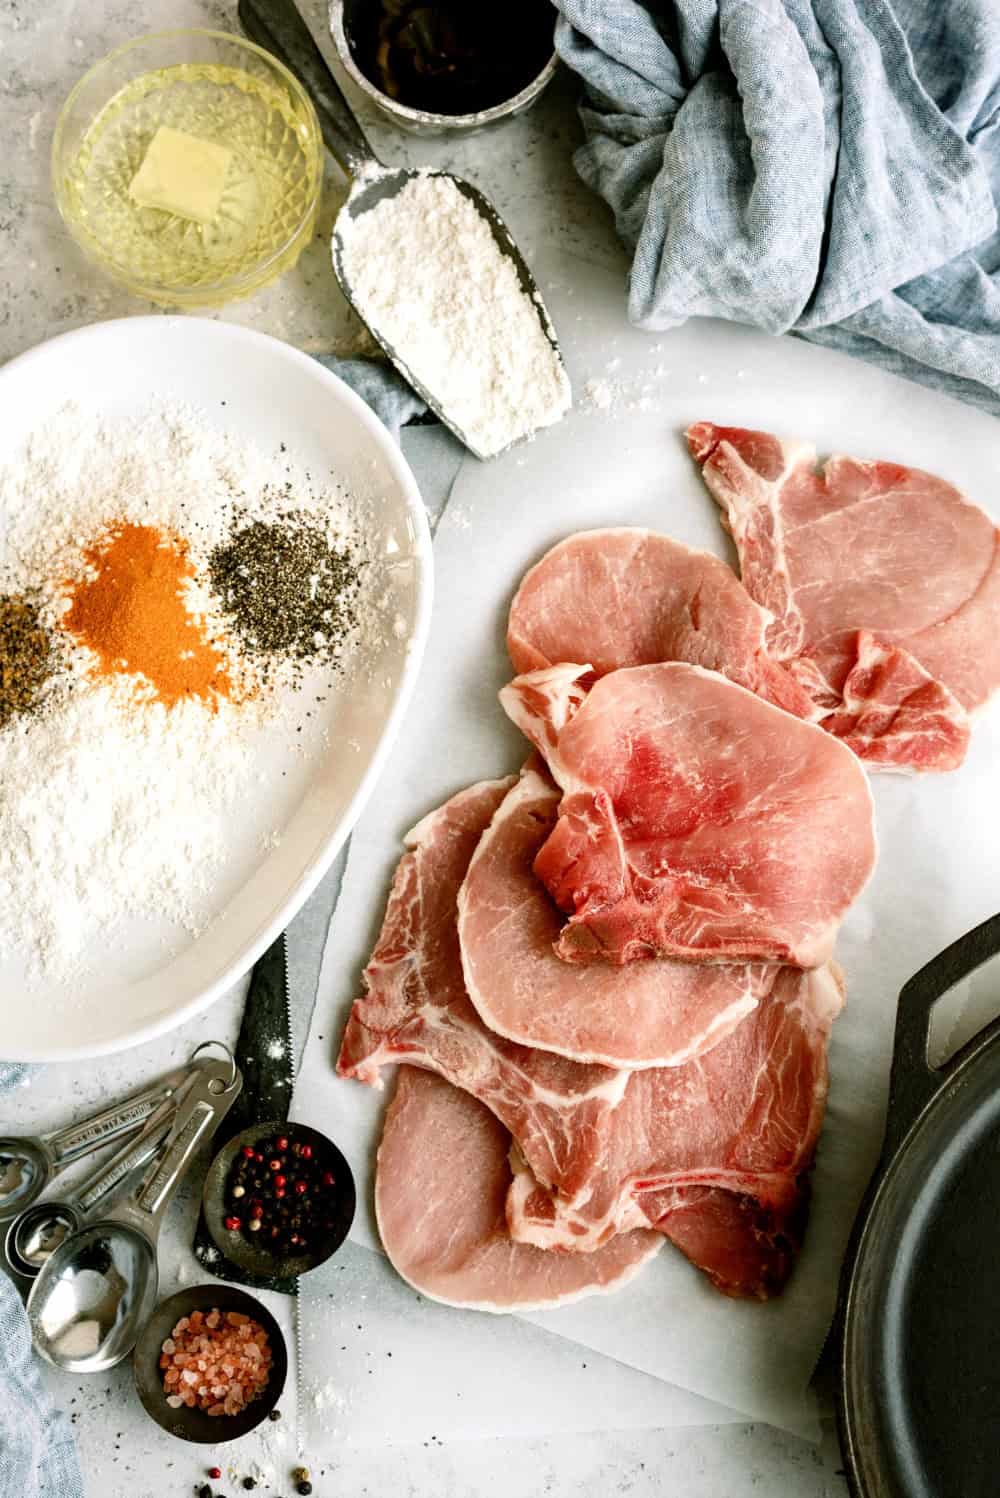 Ingredients needed to make Perfect Fried Pork Chops